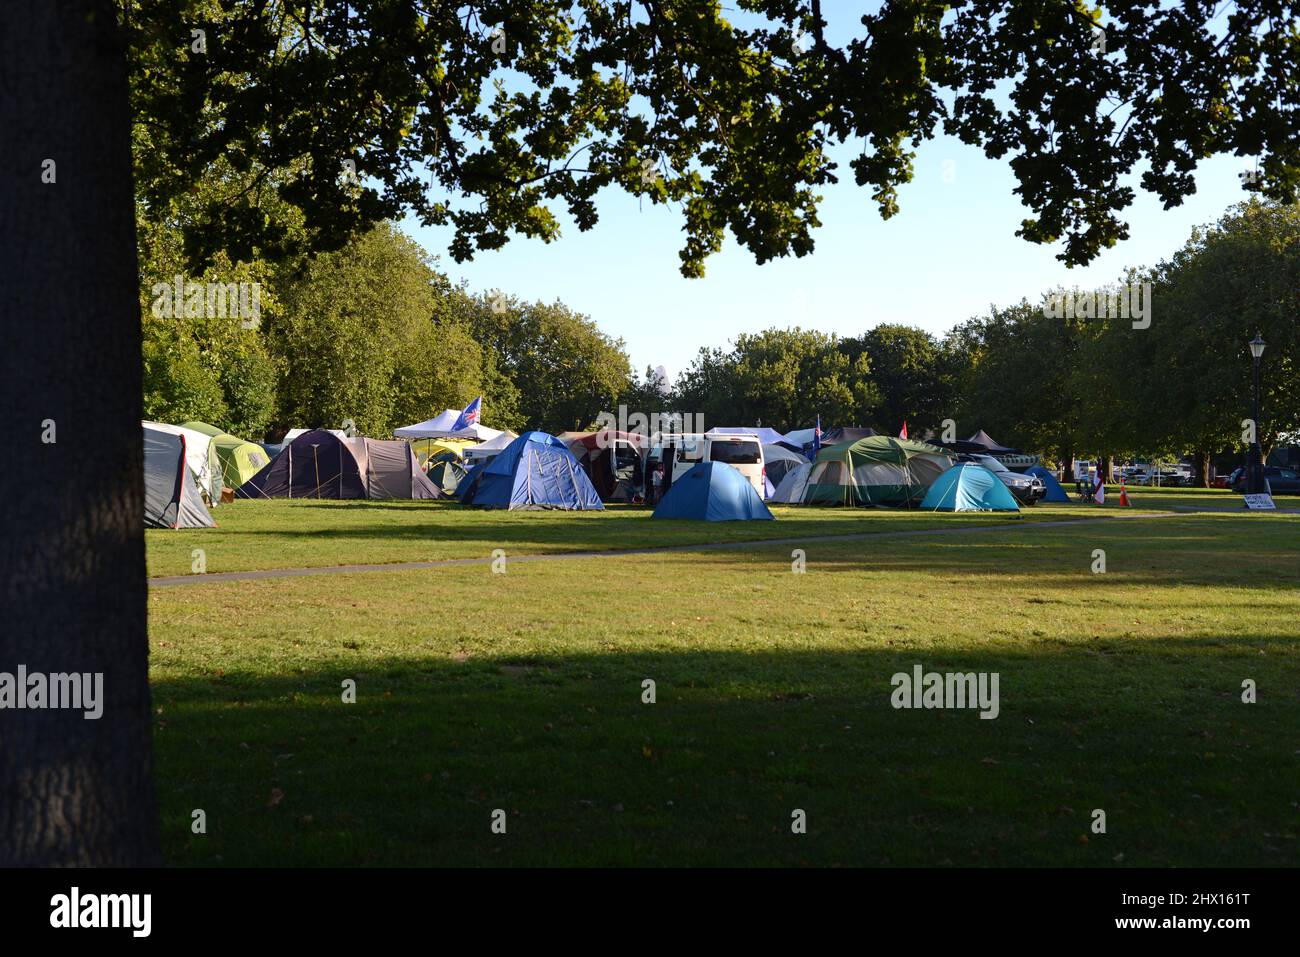 Christchurch, New Zealand, February 22, 2021: Tents at the Cranmer Square mandate protest in Christchurch. Activists pitched tents and occupied the square peacefully for several weeks. Stock Photo